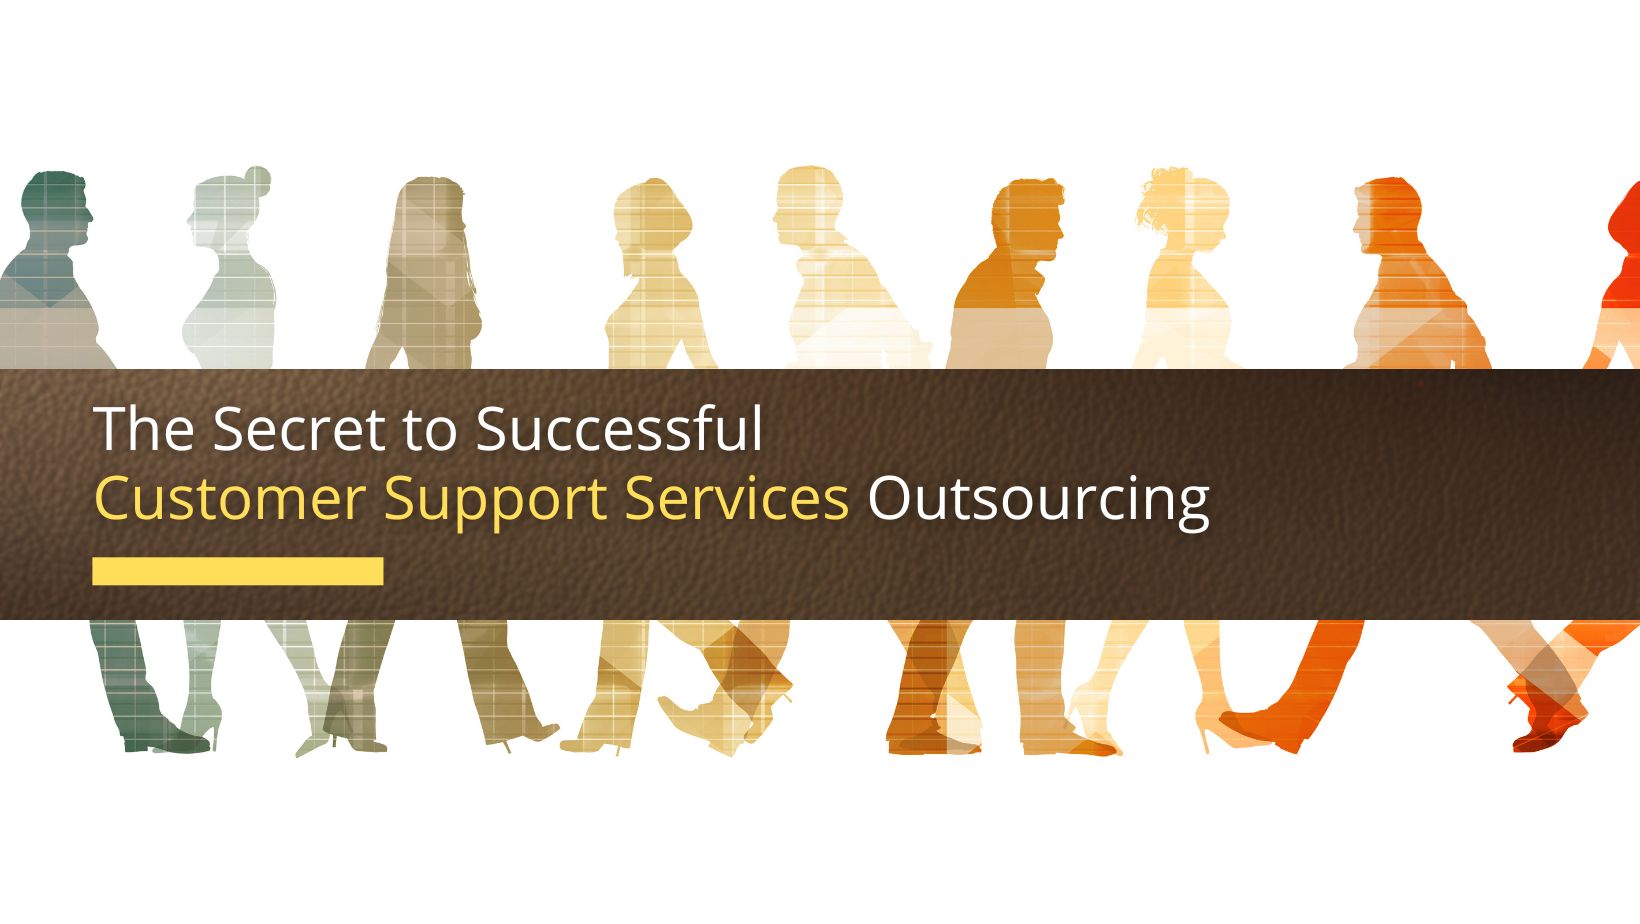 Secret to successful customer support services outsourcing